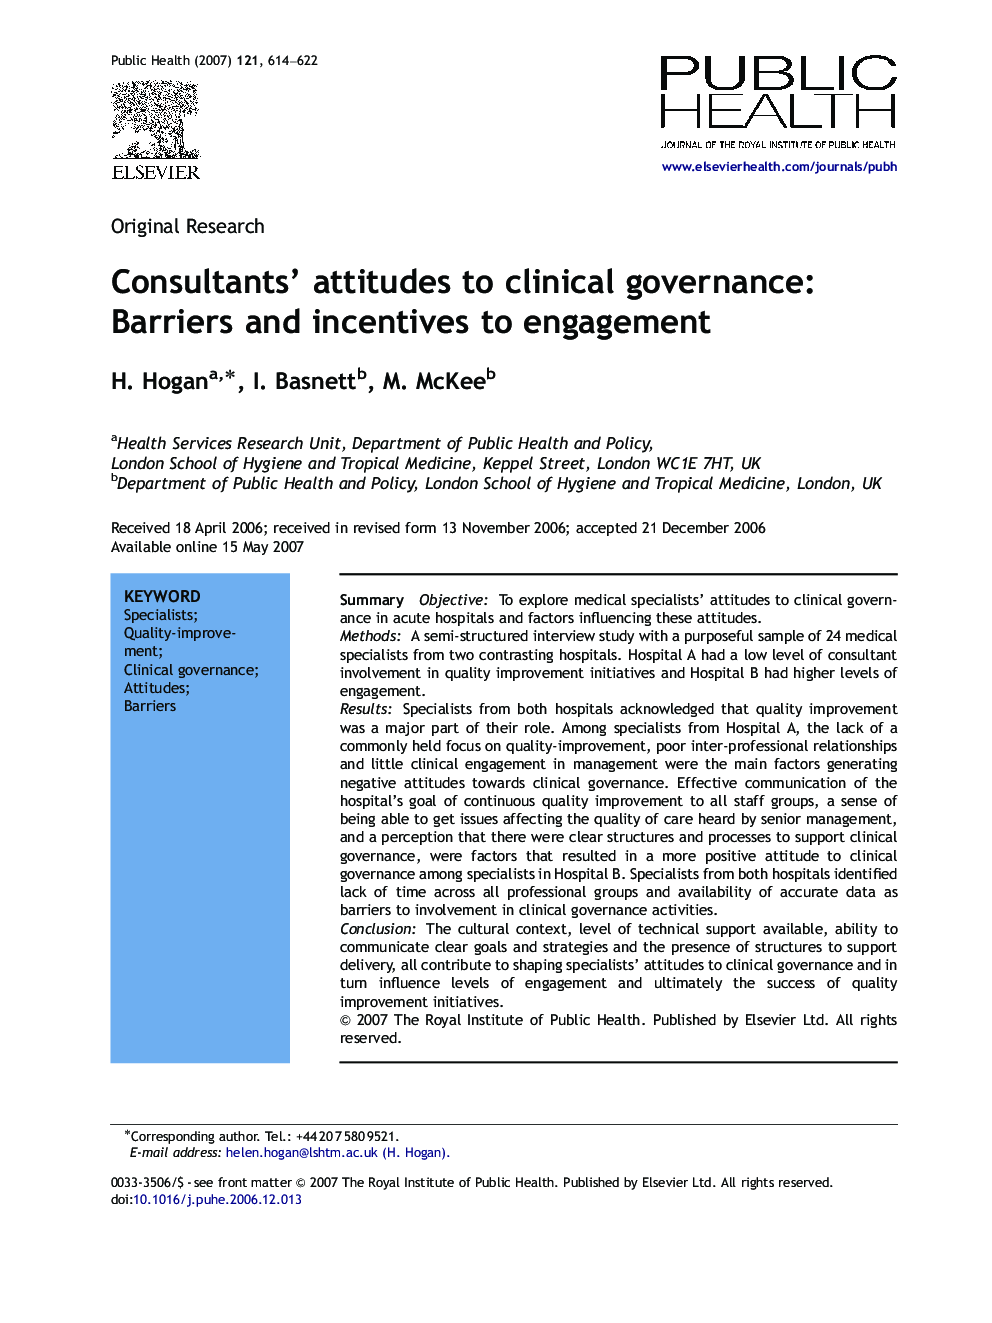 Consultants’ attitudes to clinical governance: Barriers and incentives to engagement